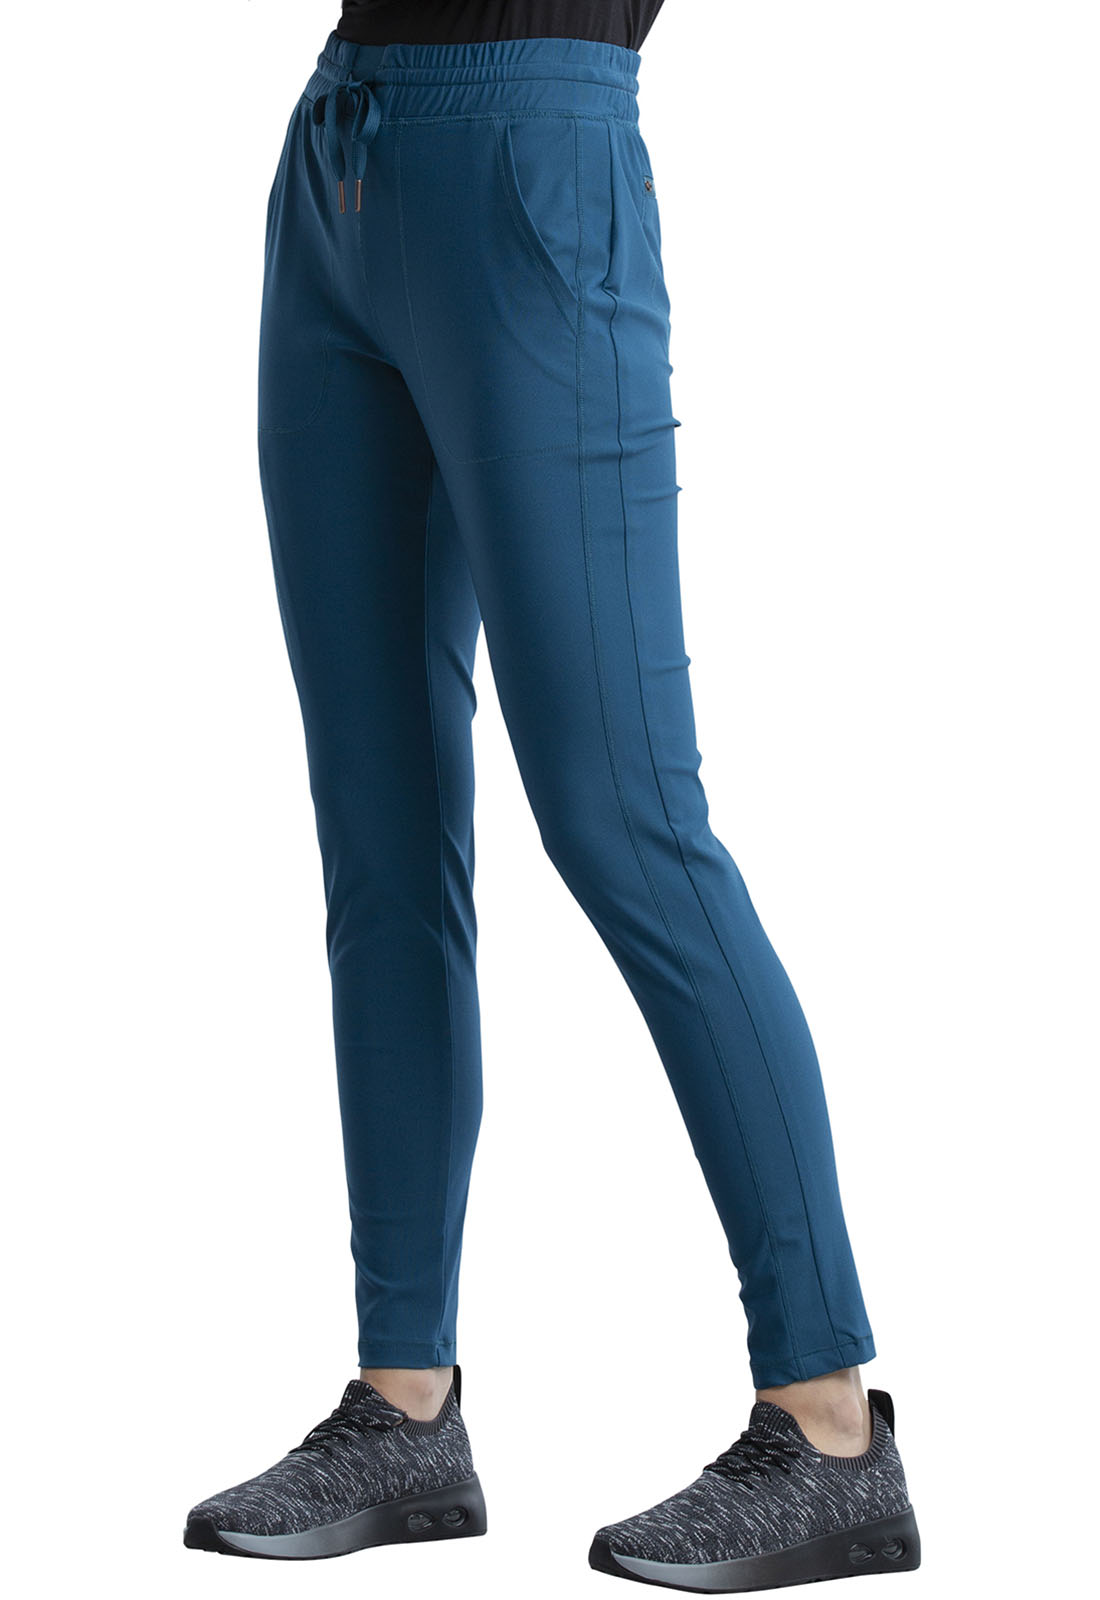 cherokee-form-mid-rise-tapered-leg-drawstring-pant-in-caribbean-blue